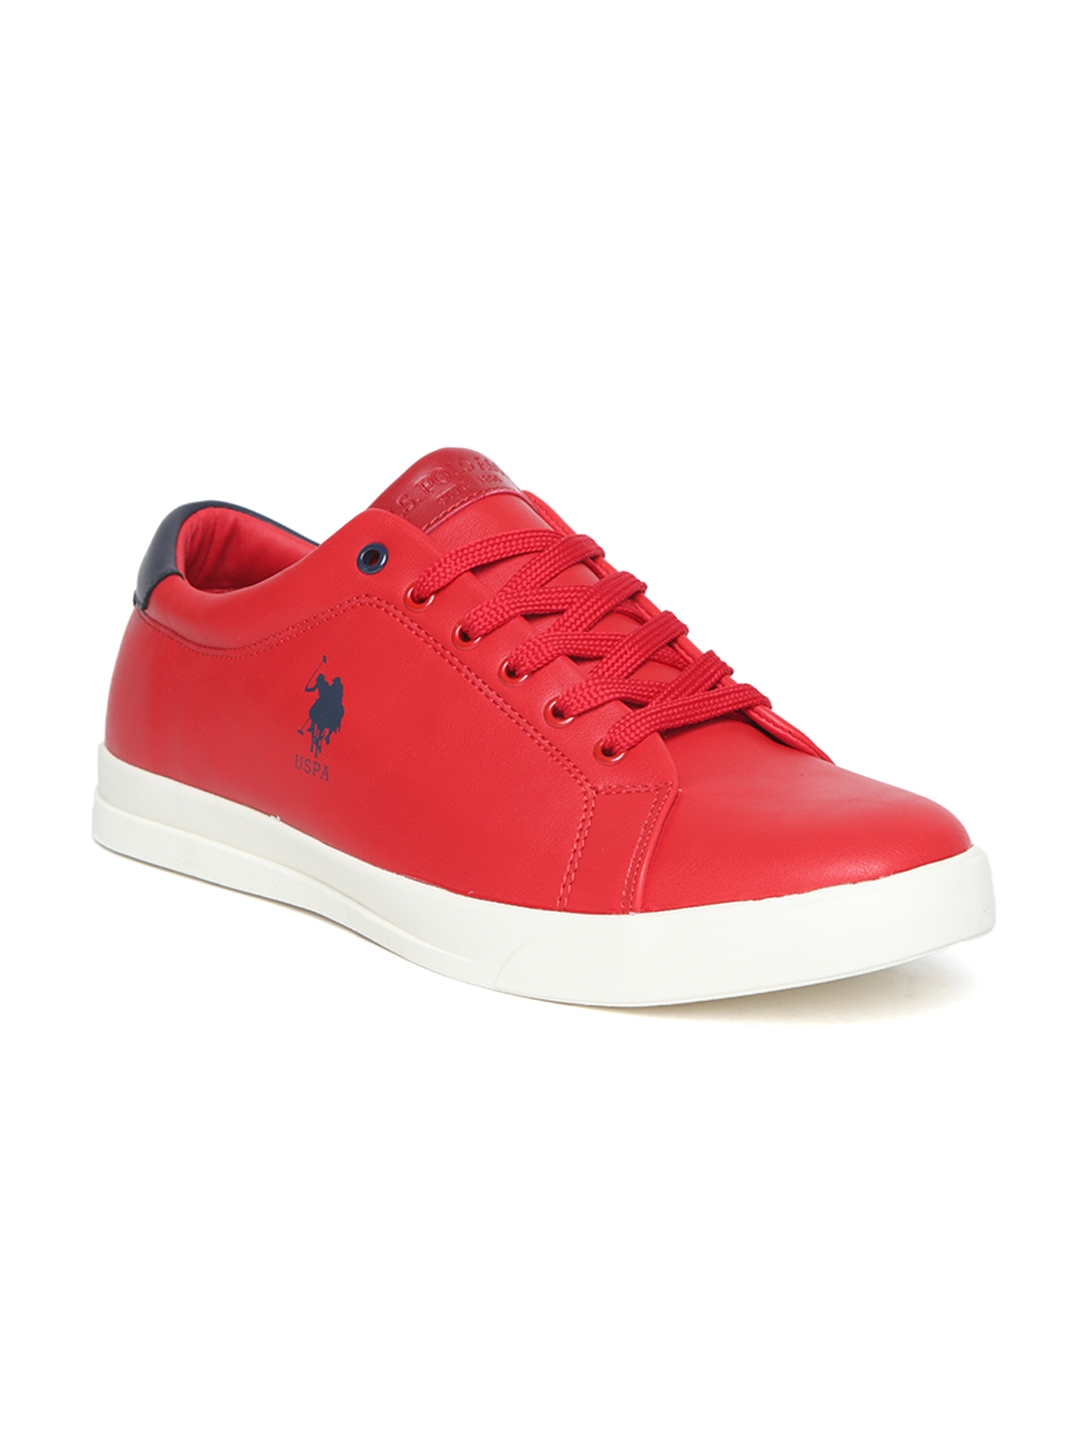 polo red shoes